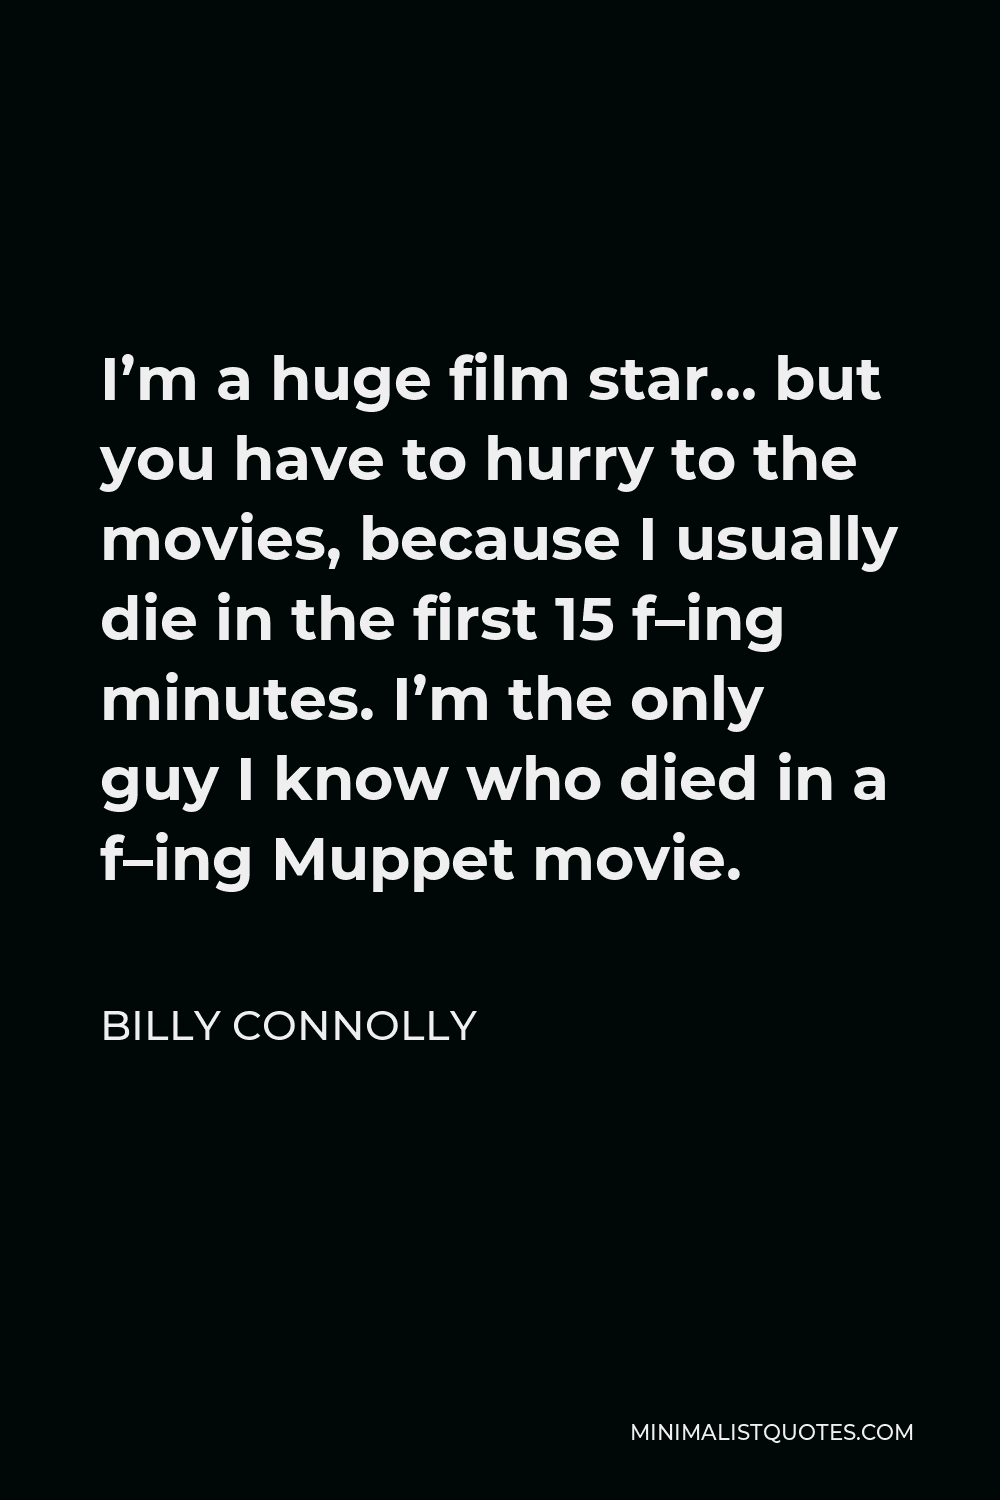 Billy Connolly Quote - I’m a huge film star… but you have to hurry to the movies, because I usually die in the first 15 f–ing minutes. I’m the only guy I know who died in a f–ing Muppet movie.